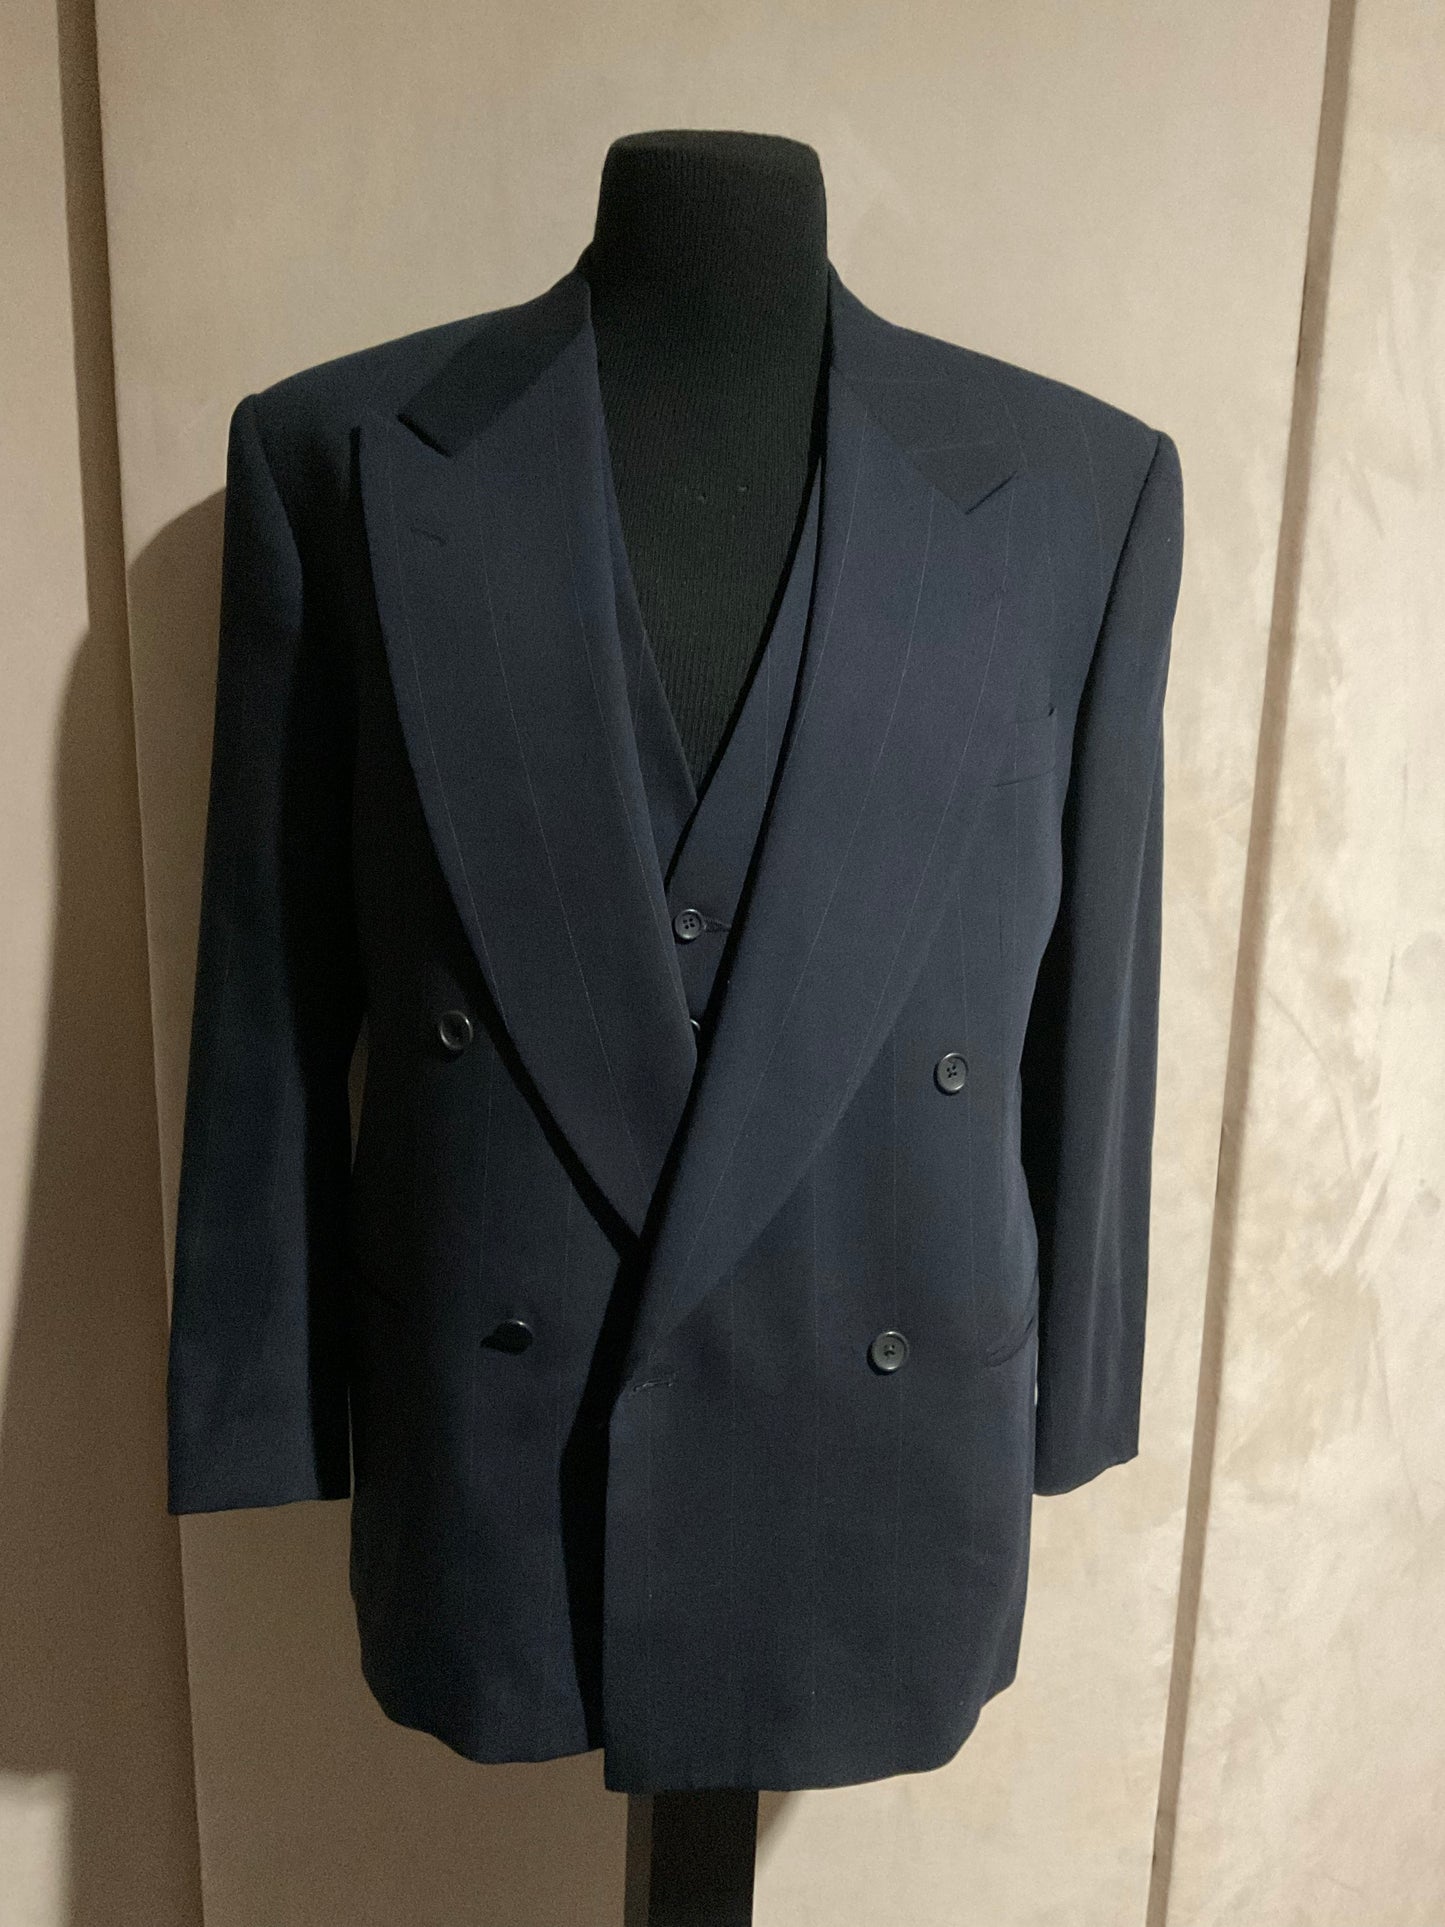 R P SUIT & VEST / DOUBLE BREASTED / NAVY STRIPE / 40 REG / MADE IN ITALY